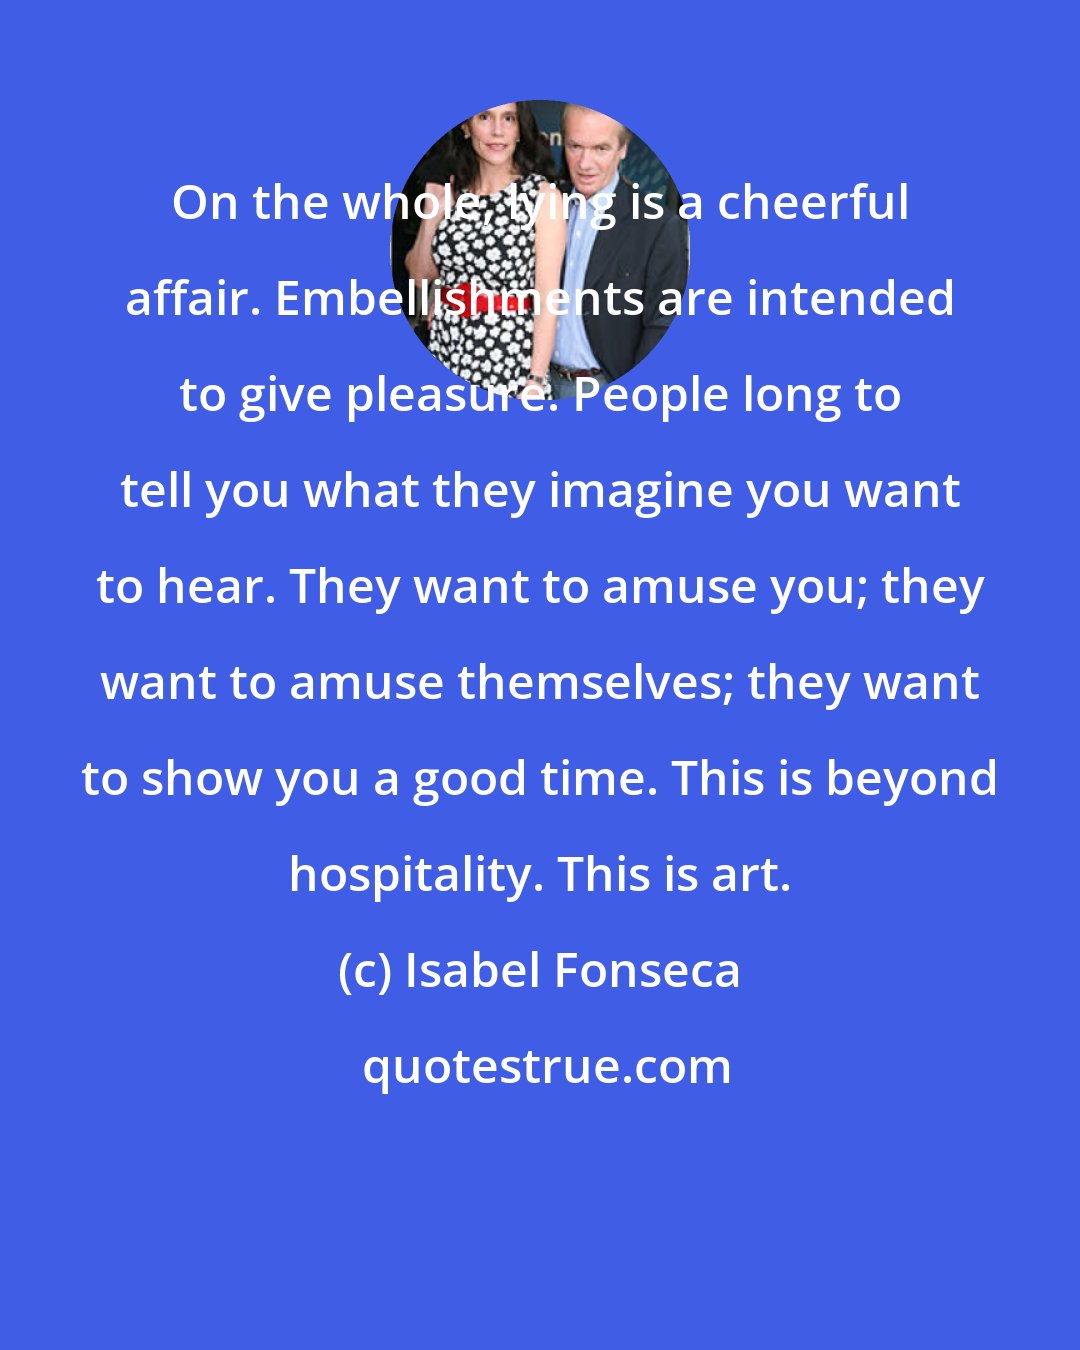 Isabel Fonseca: On the whole, lying is a cheerful affair. Embellishments are intended to give pleasure. People long to tell you what they imagine you want to hear. They want to amuse you; they want to amuse themselves; they want to show you a good time. This is beyond hospitality. This is art.